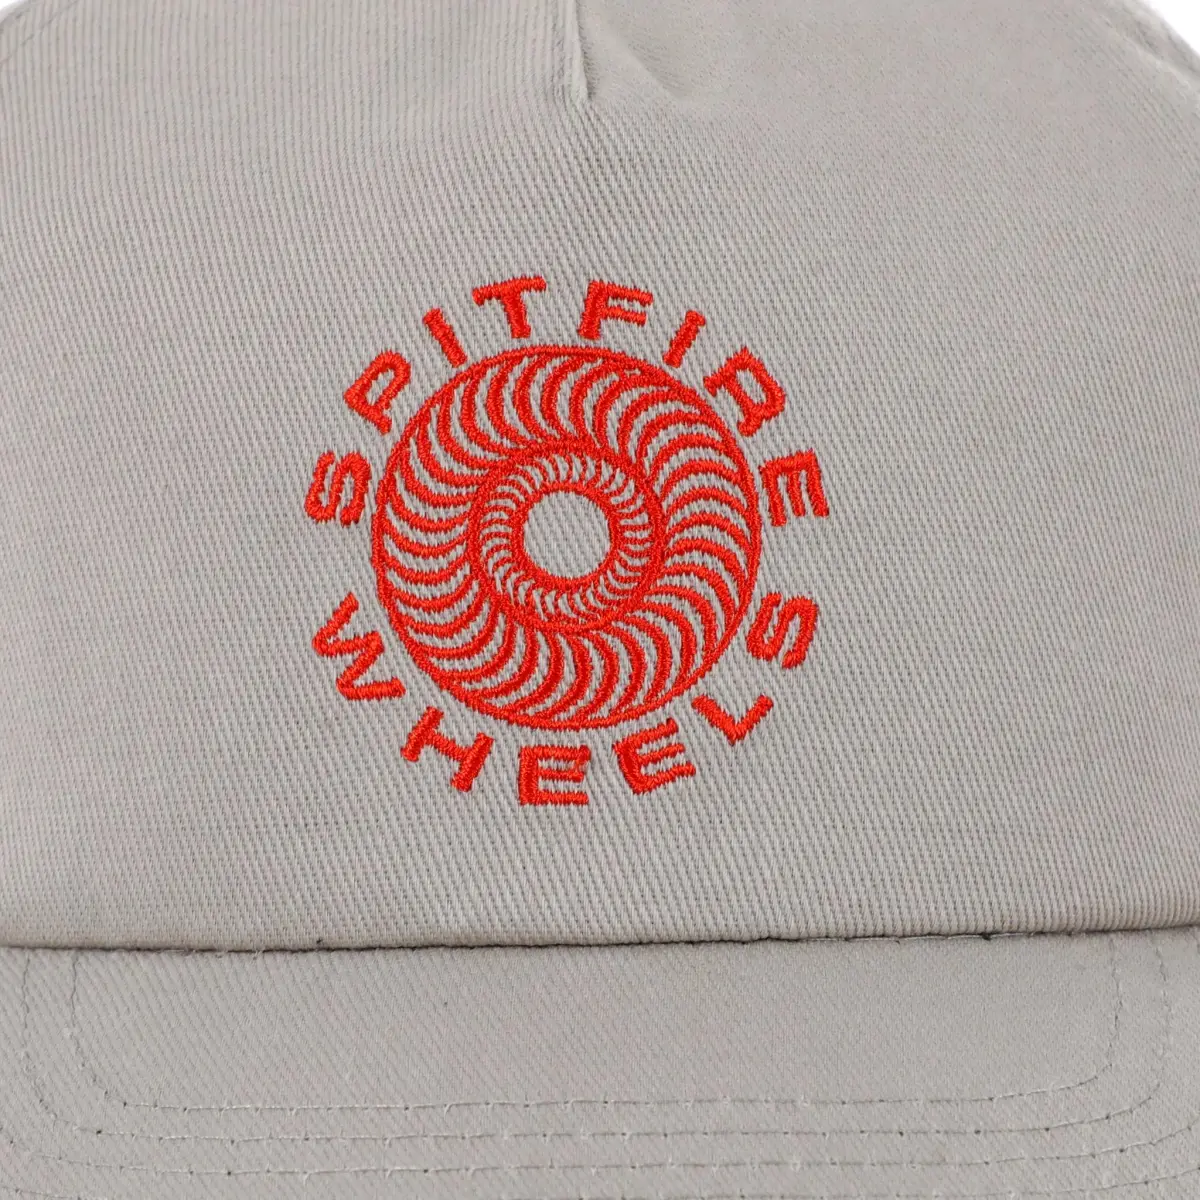 Spitfire clsassic swirdel snapback red and grey